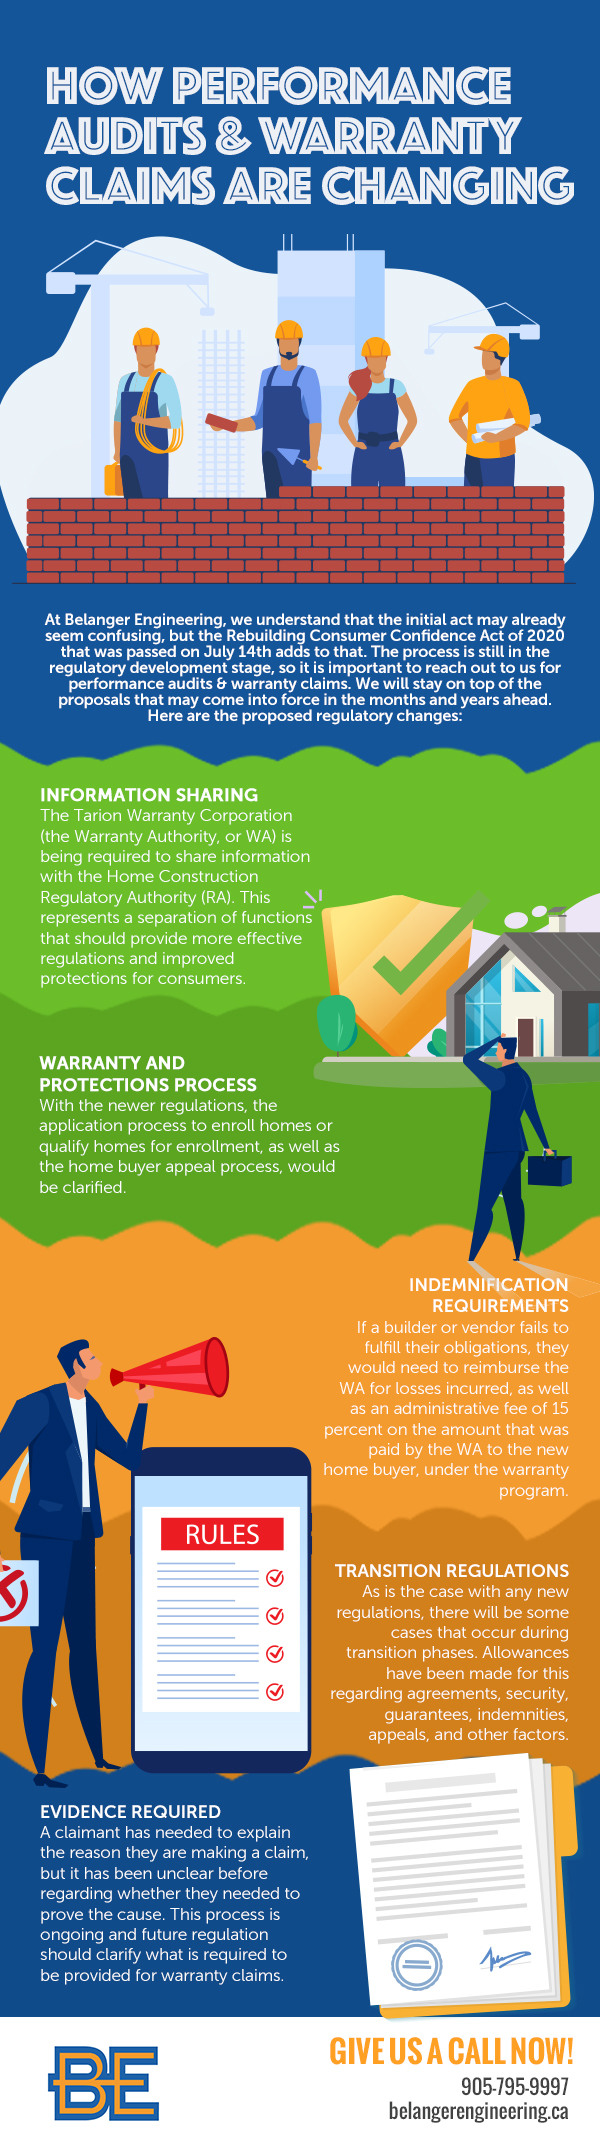 How Performance Audits & Warranty Claims are Changing [infographic]